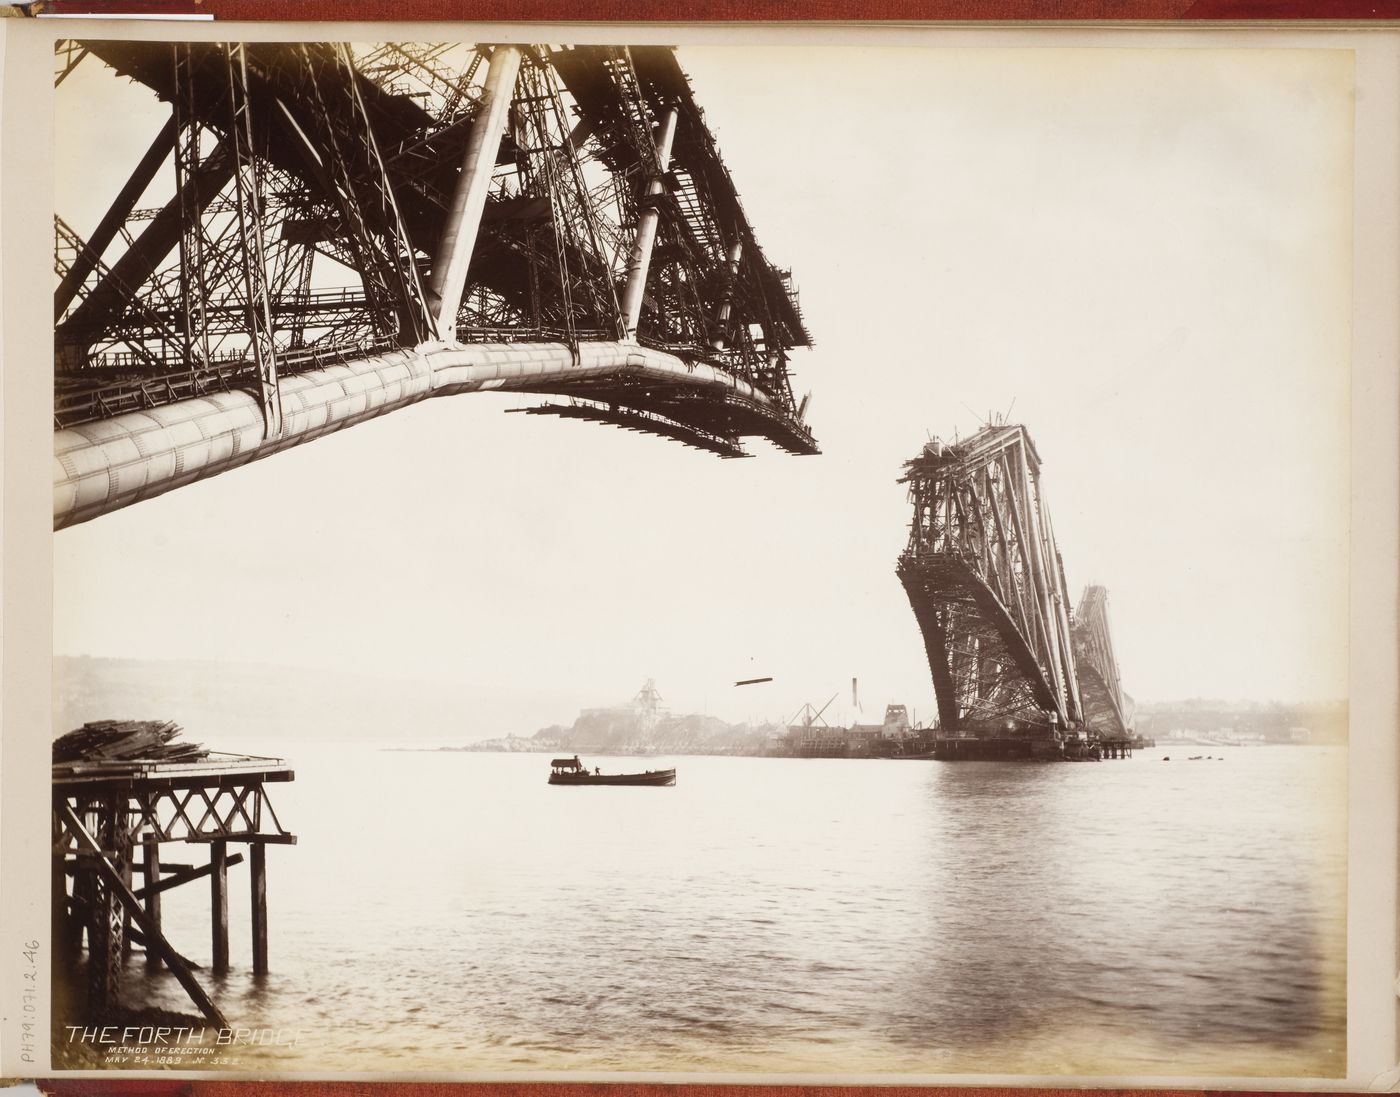 Construction View Showing the Gap Between the Inchgarvie and Fife Cantilevers to be Closed, Forth Bridge, Scotland, 24 May 1889